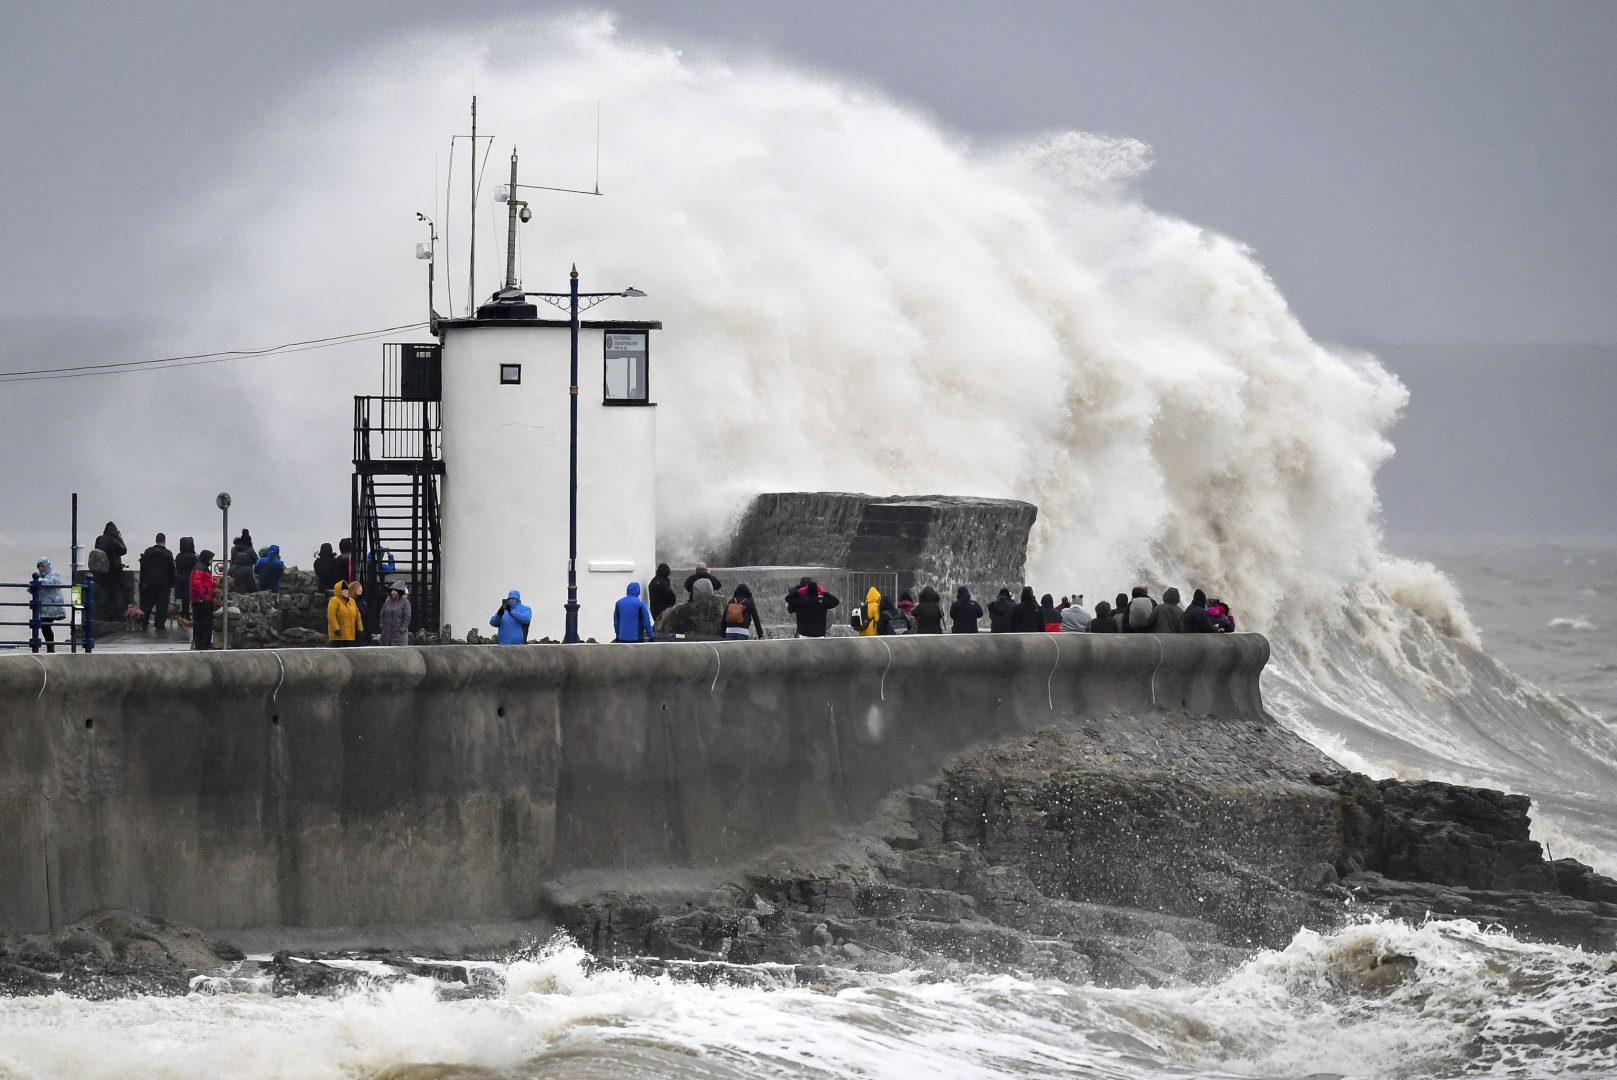 People watch waves and rough seas pound against the harbour wall at Porthcawl in Wales, as Storm Dennis sweeps across the country, Saturday Feb. 15, 2020.  Enormous waves  are churning across the North Atlantic as Britain braces for a second straight weekend of wild winter weather and flooding. (Ben Birchall/PA via AP)